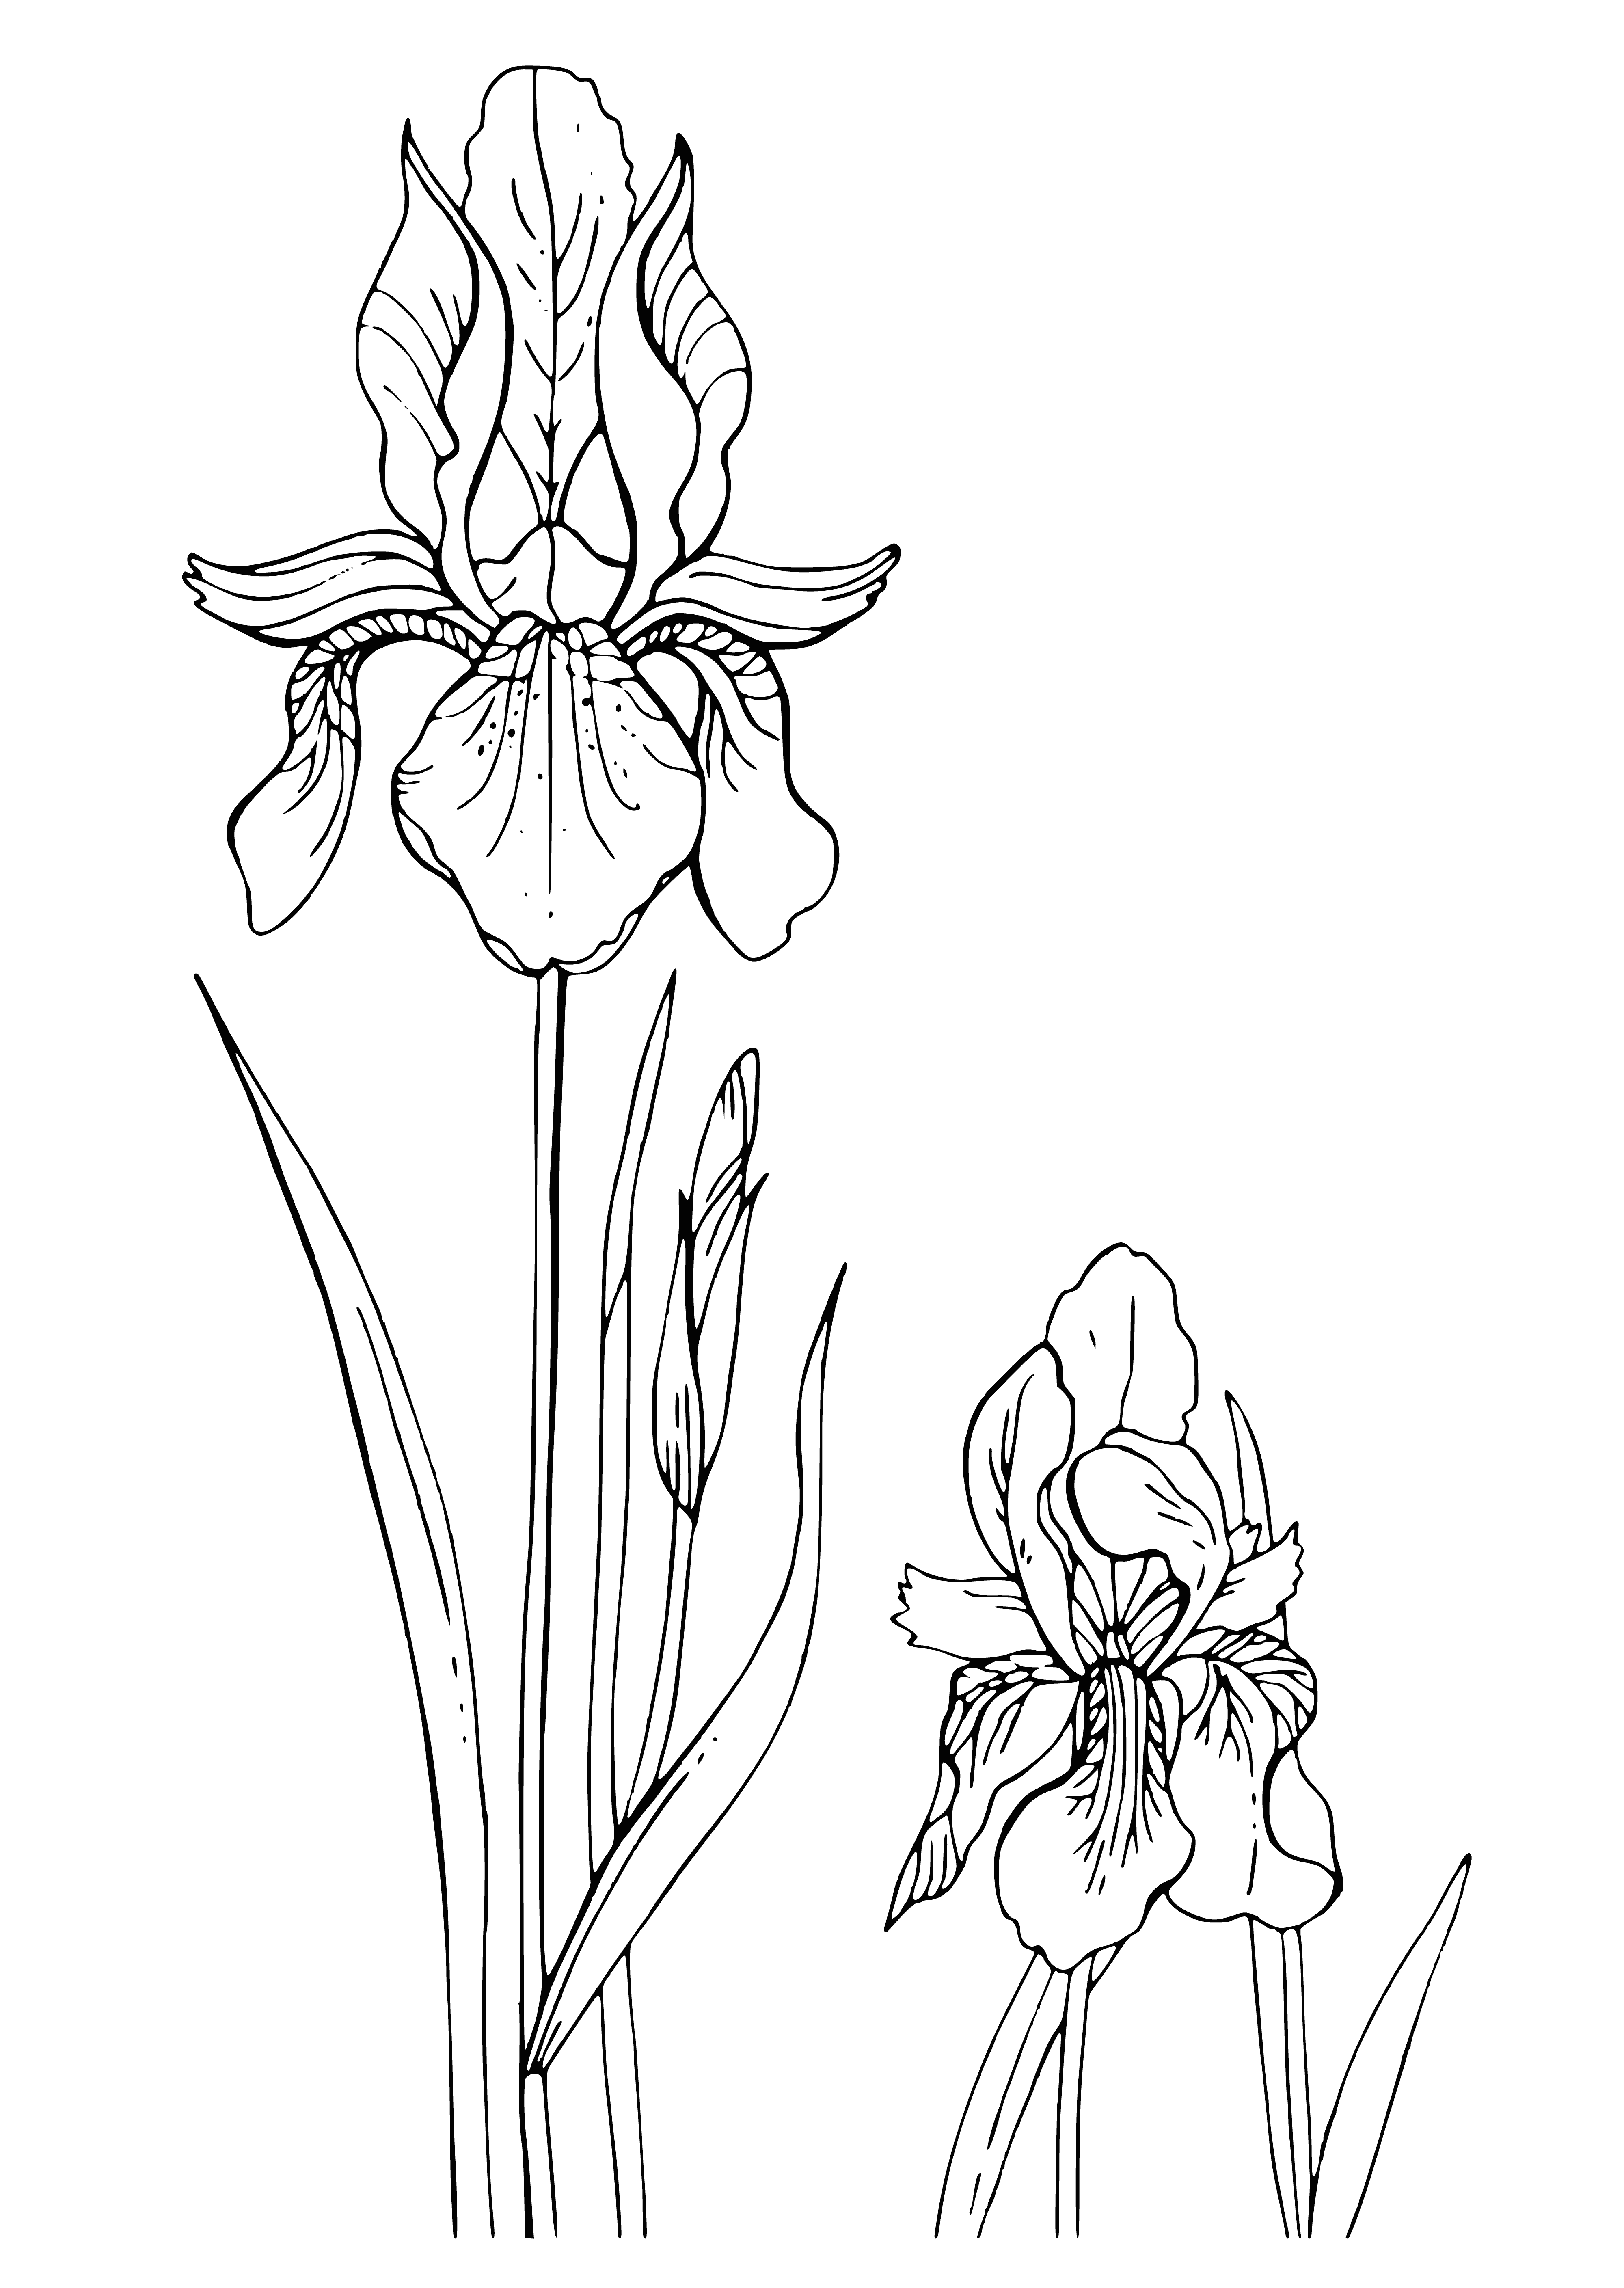 Irises coloring page